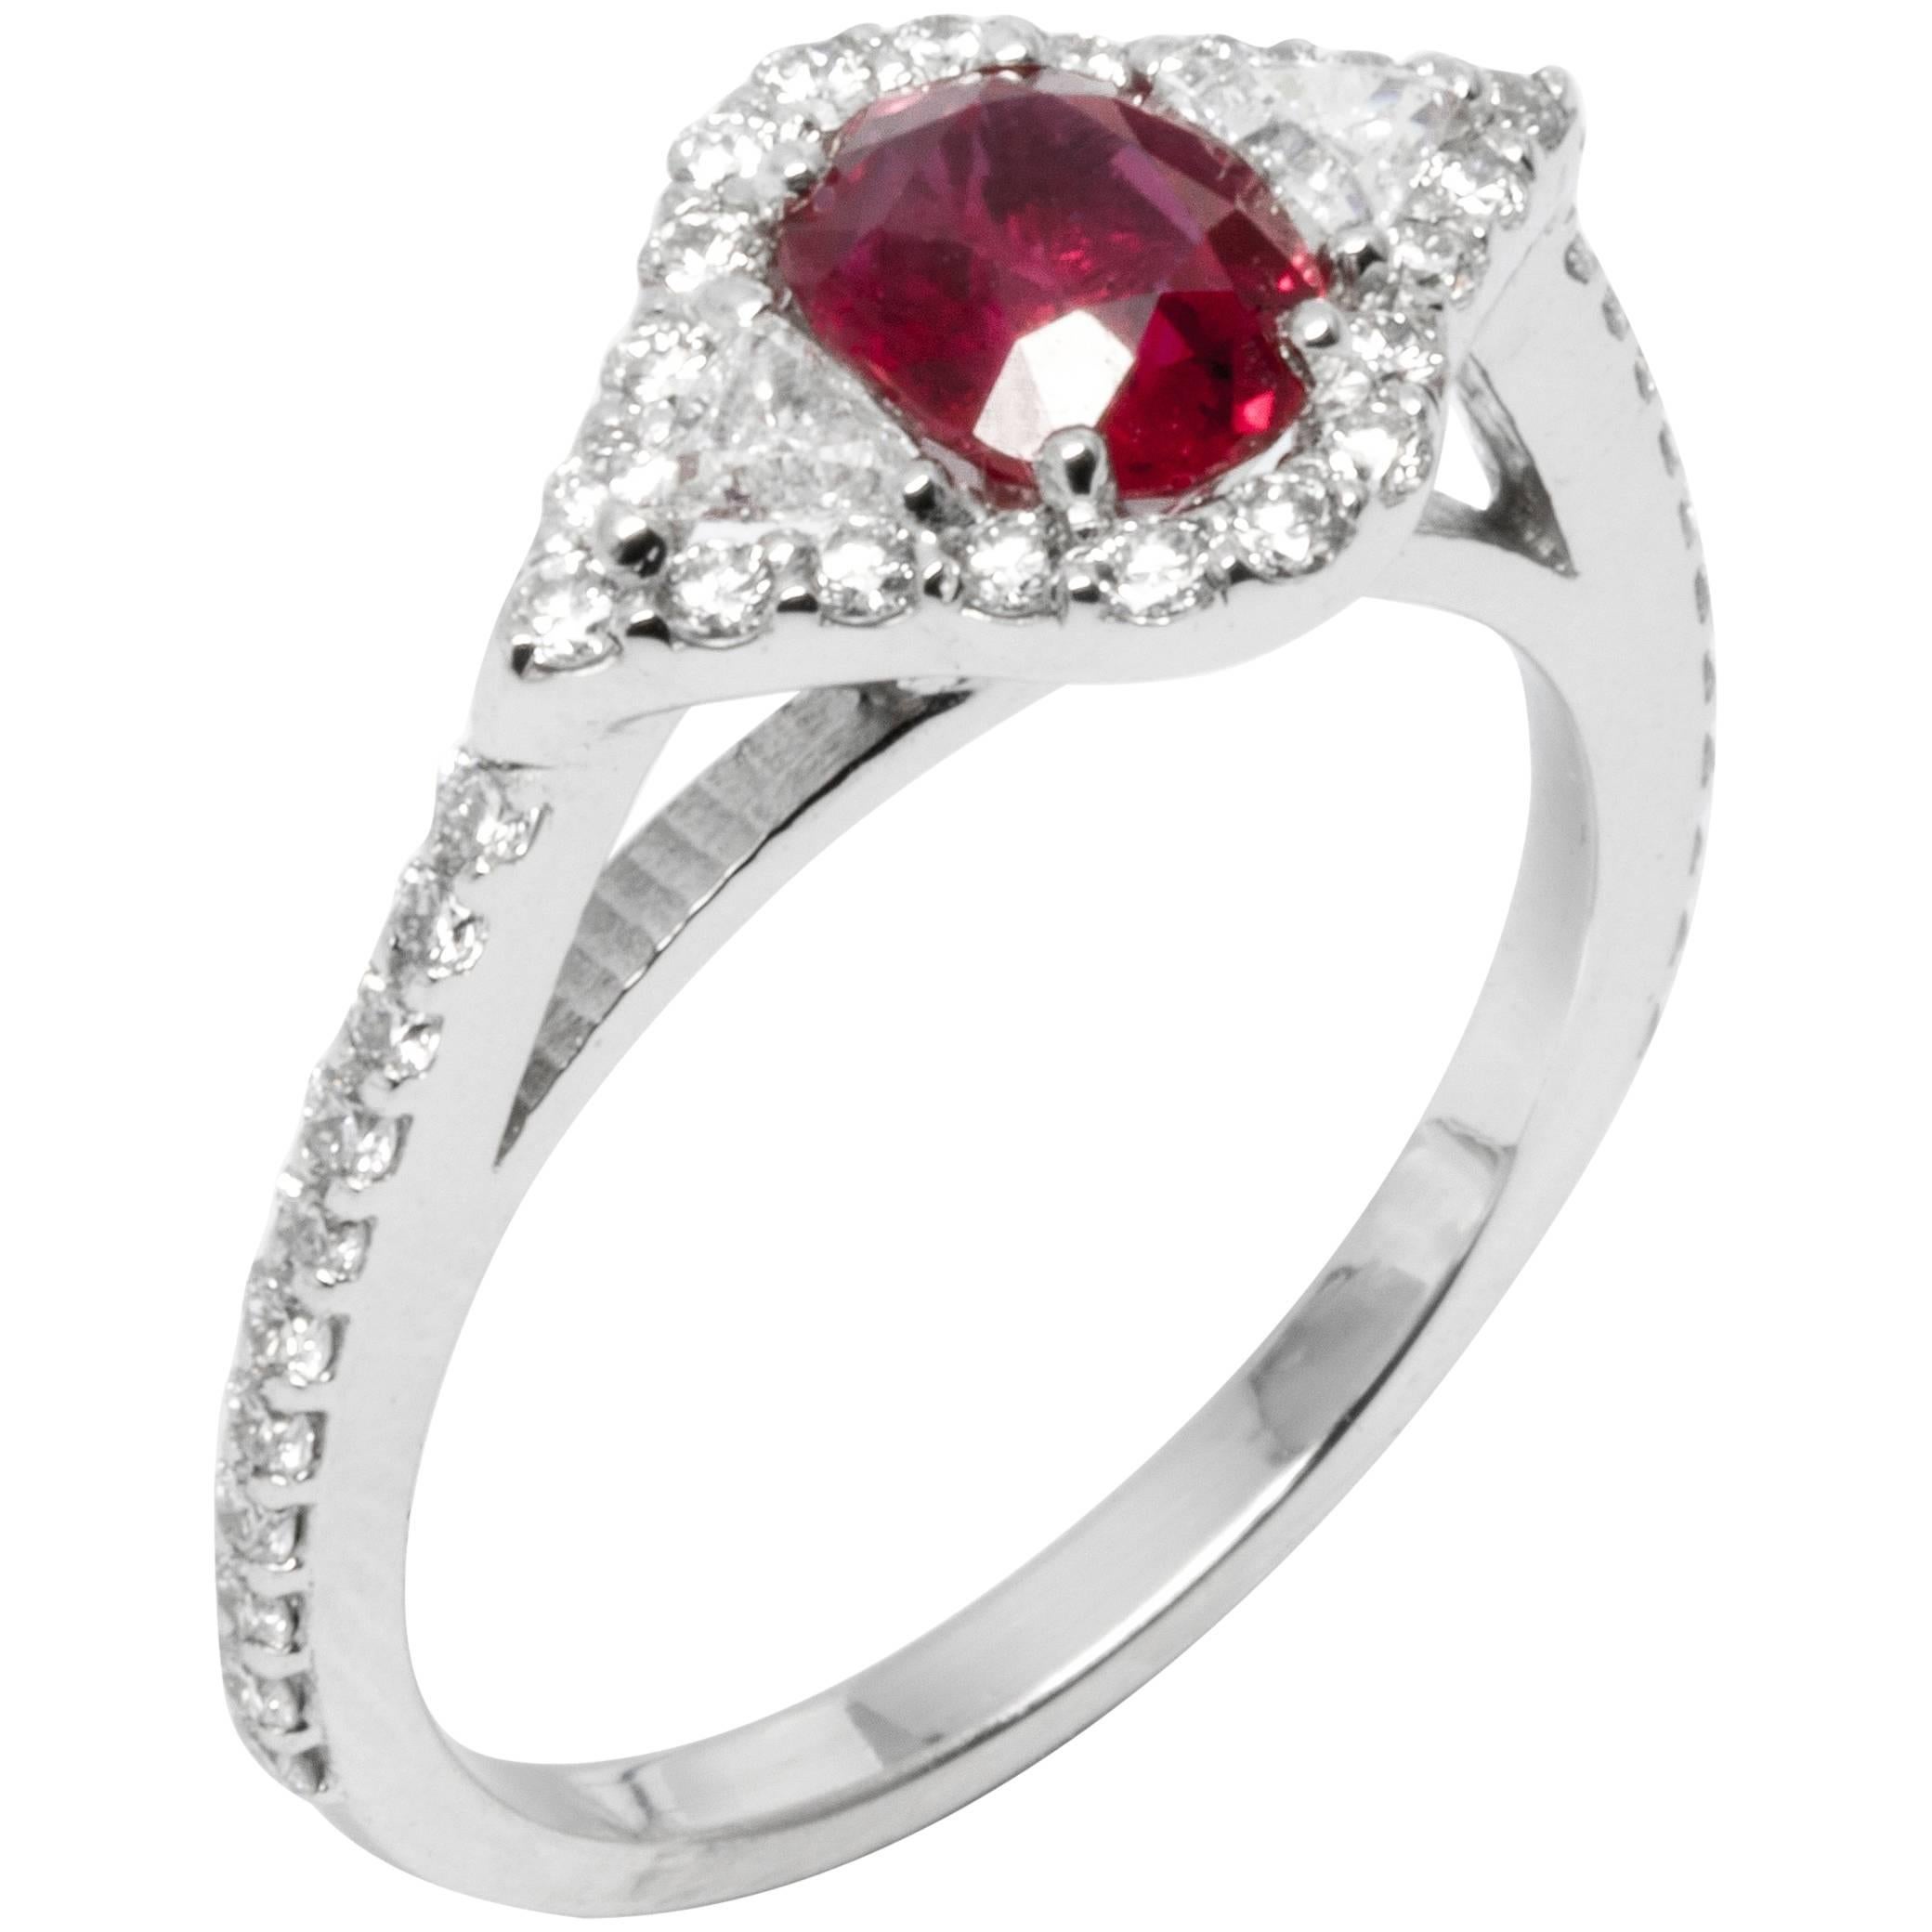 Cushion Ruby and Diamond Cluster Cocktail Ring Weighing 1.86 Carat